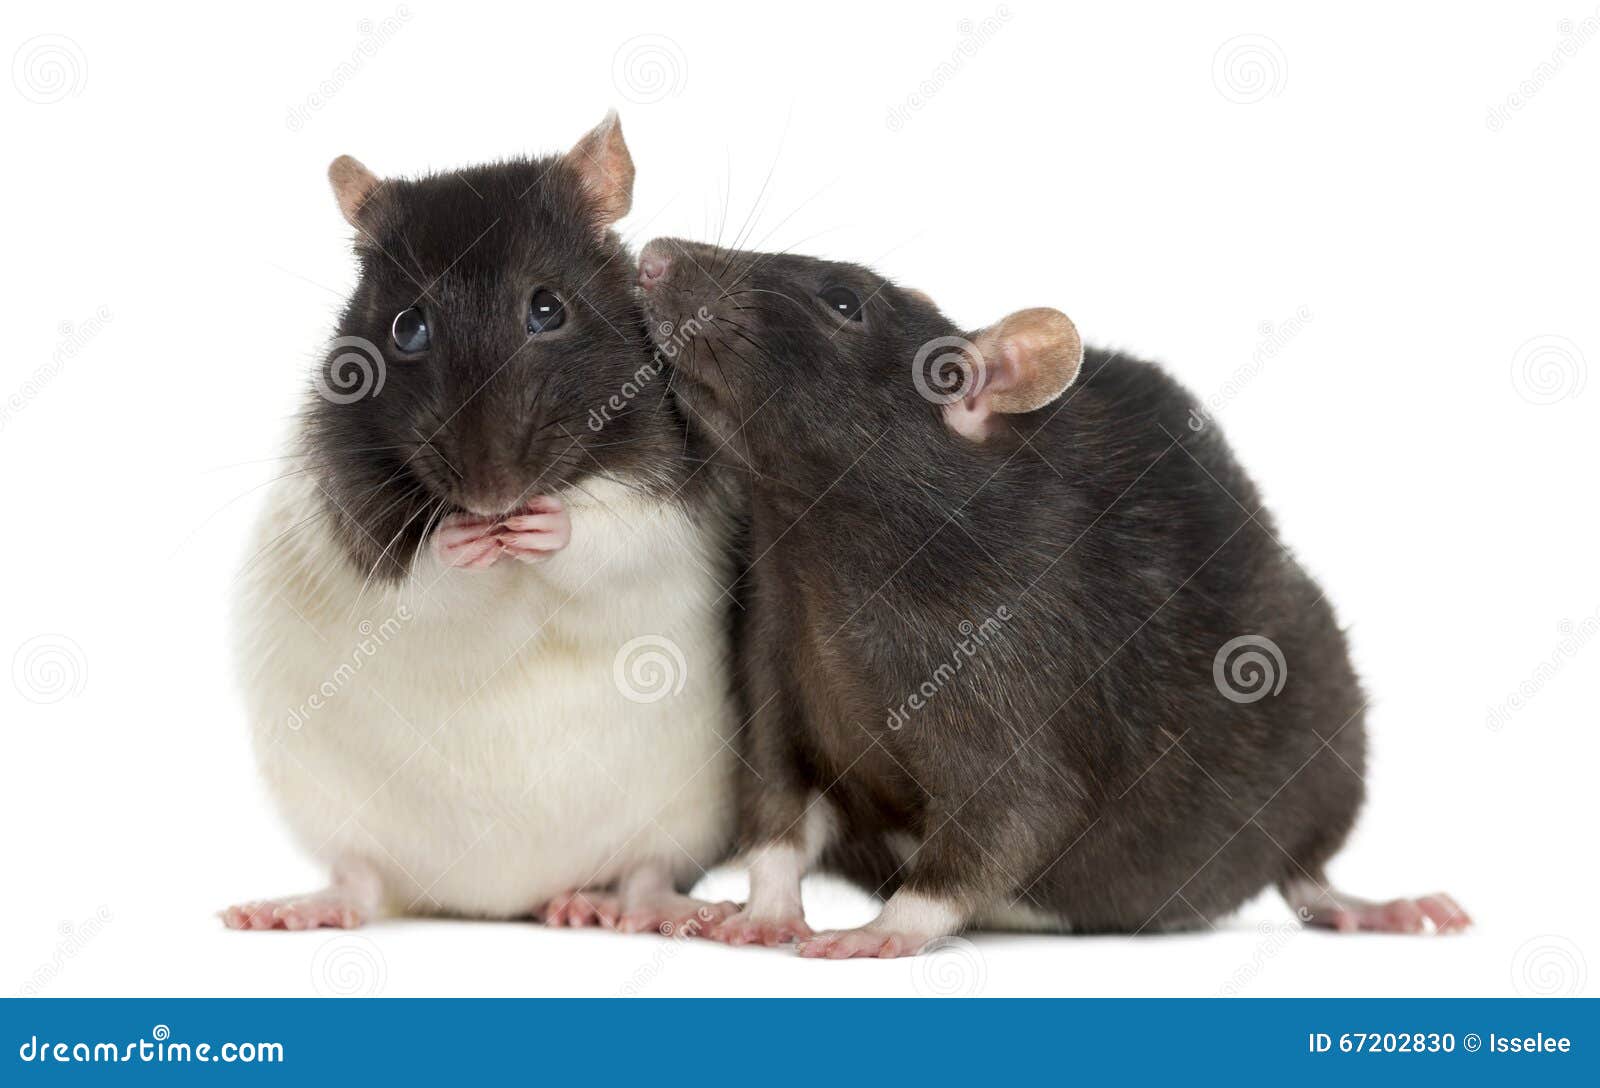 couple of rats sitting and sniffing